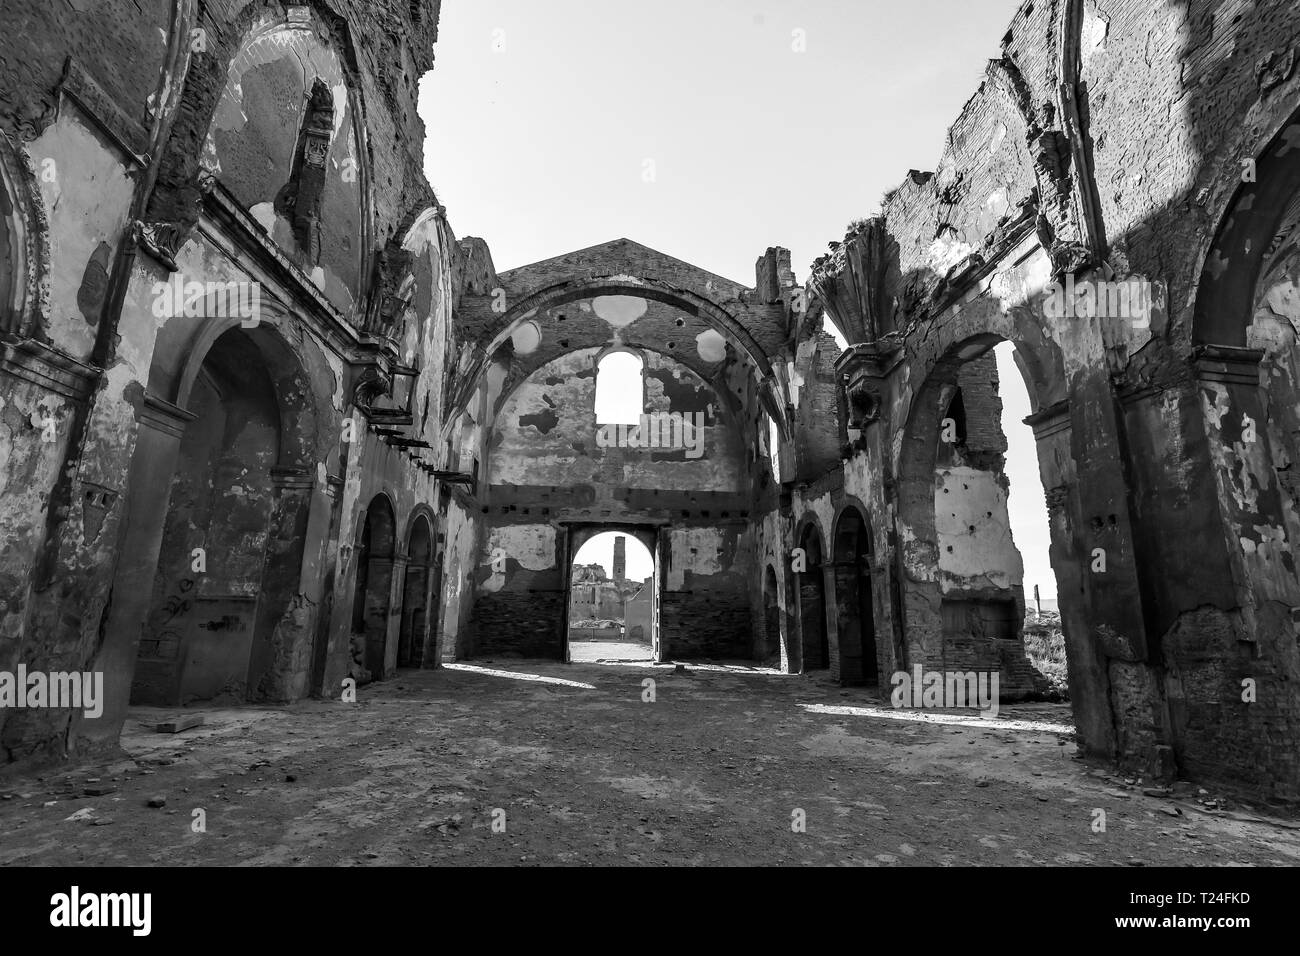 The remains of St Martin church in Belchite, a town in Aragon that was completely destroyed during the Spanish civil war - Belchite - Spain Stock Photo